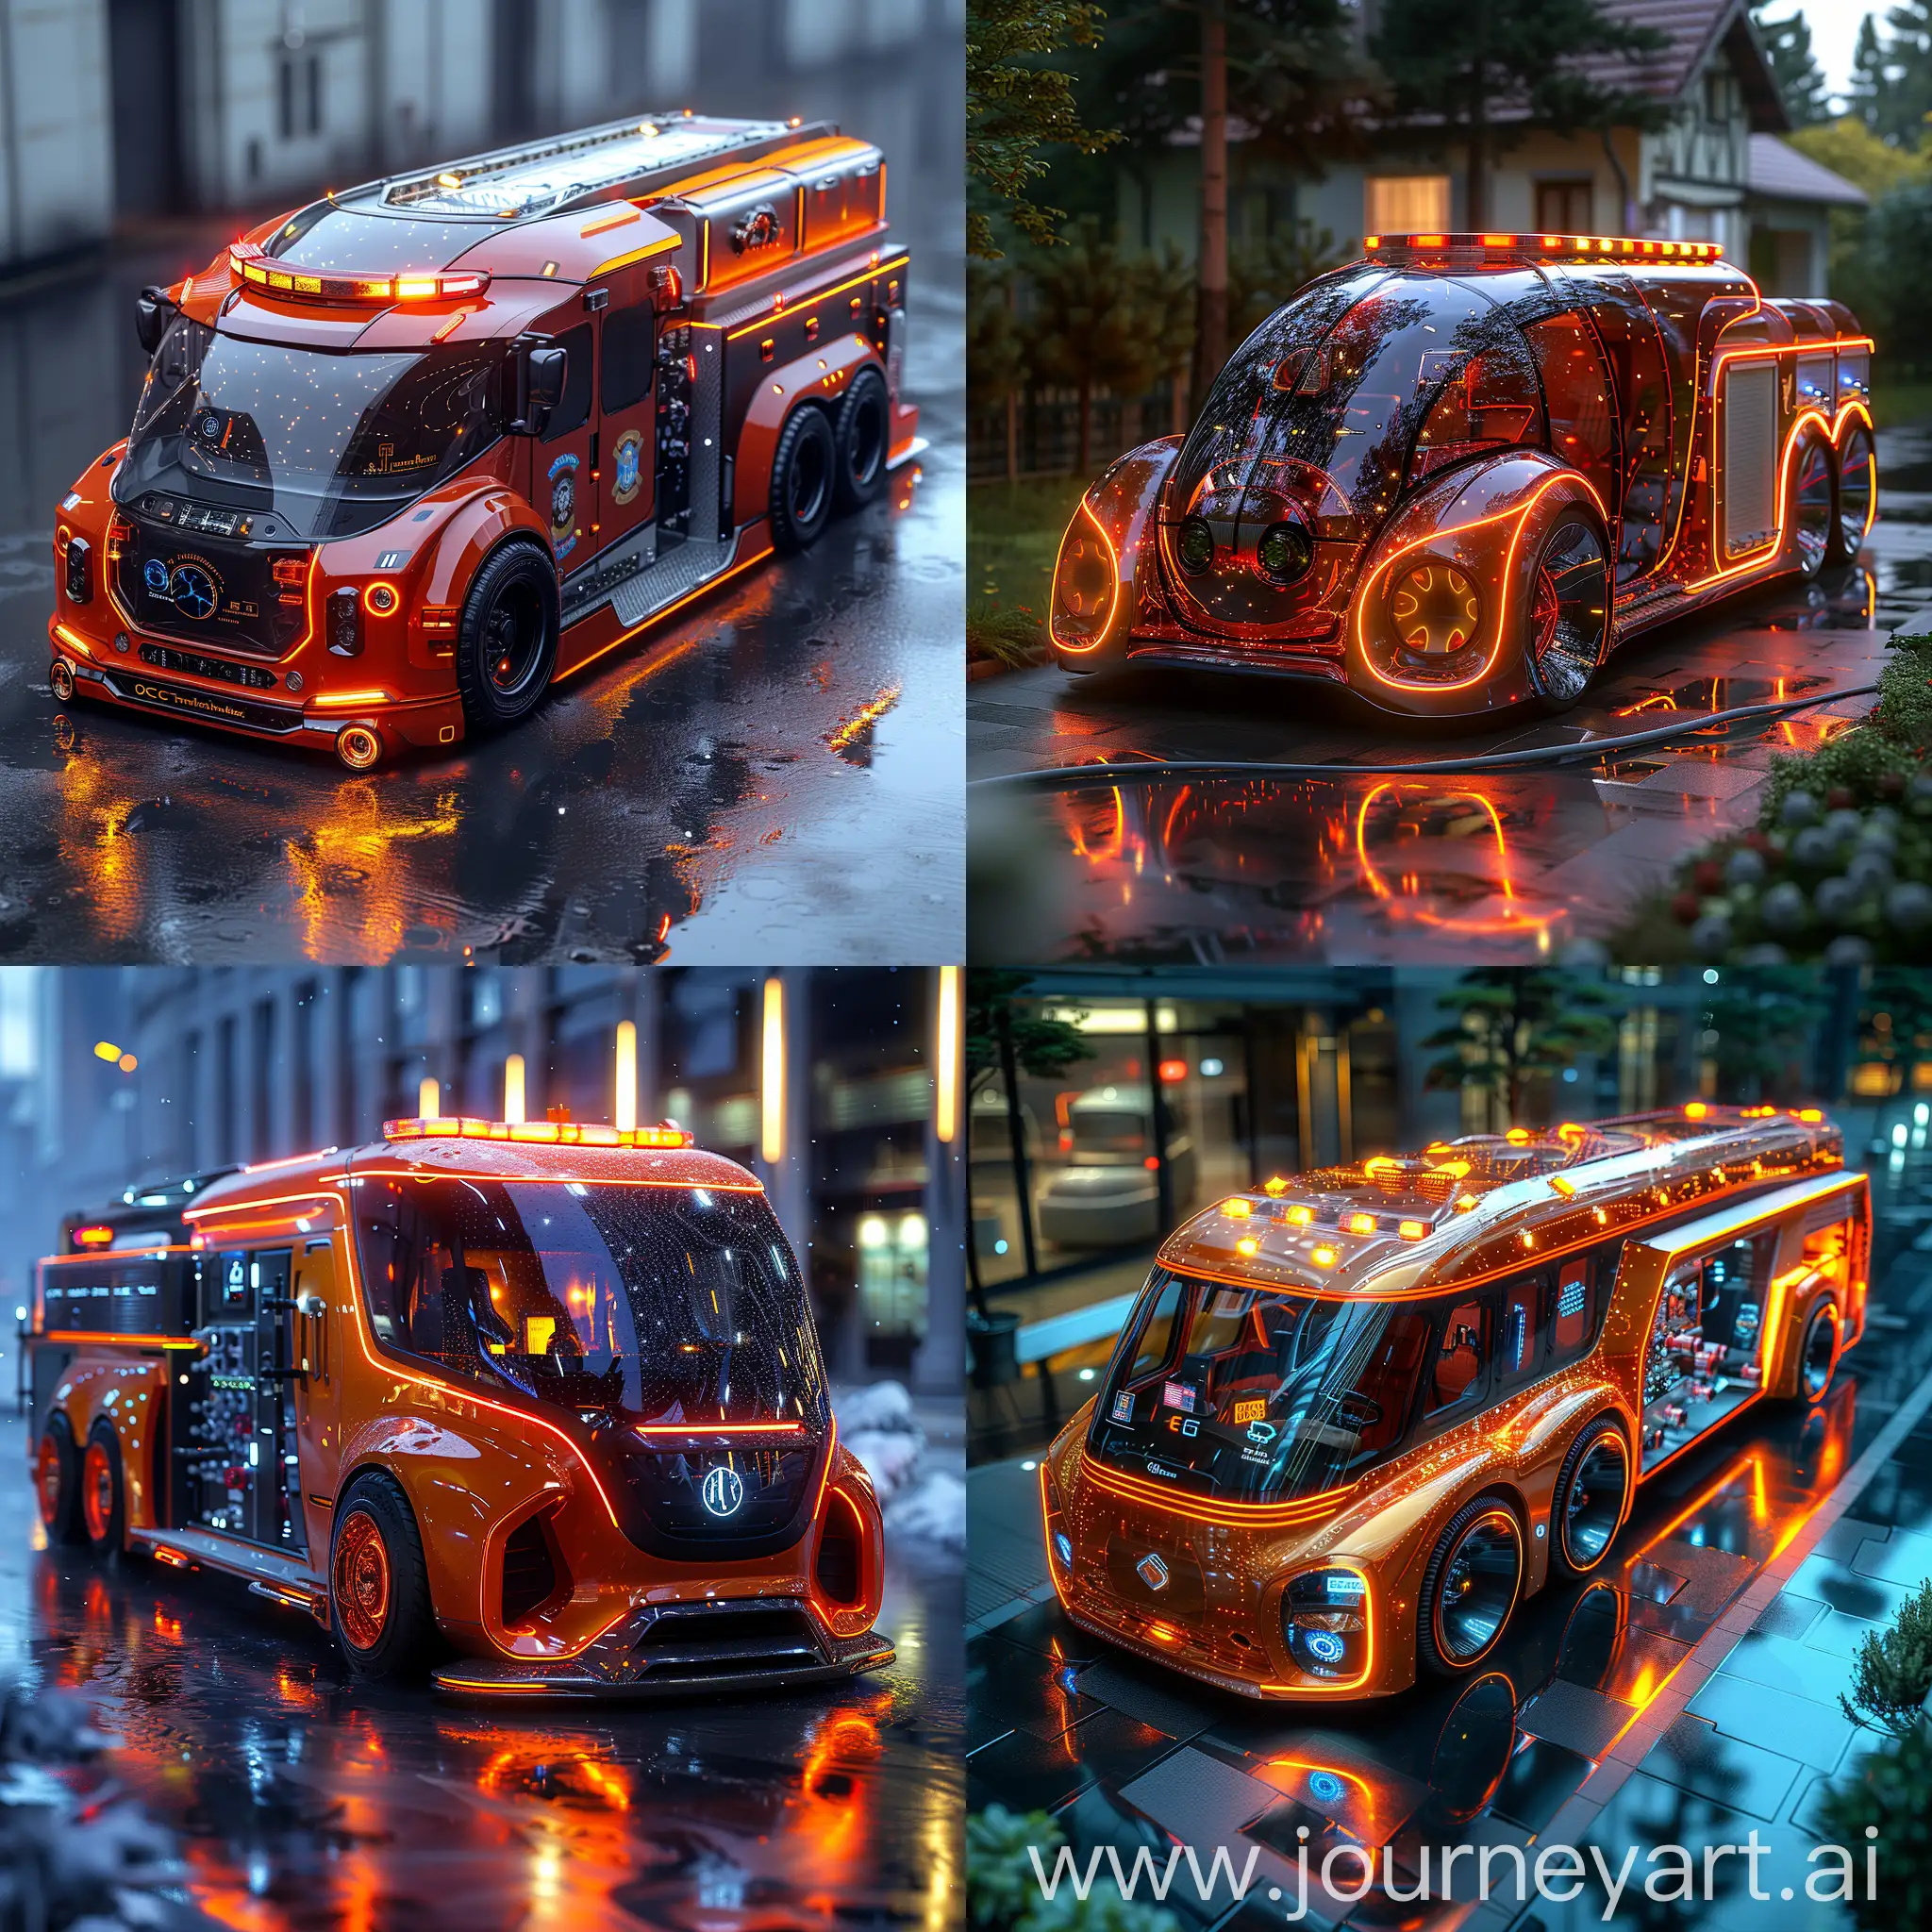 Advanced-Futuristic-Fire-Truck-with-Electric-Powertrain-and-Intelligent-Features